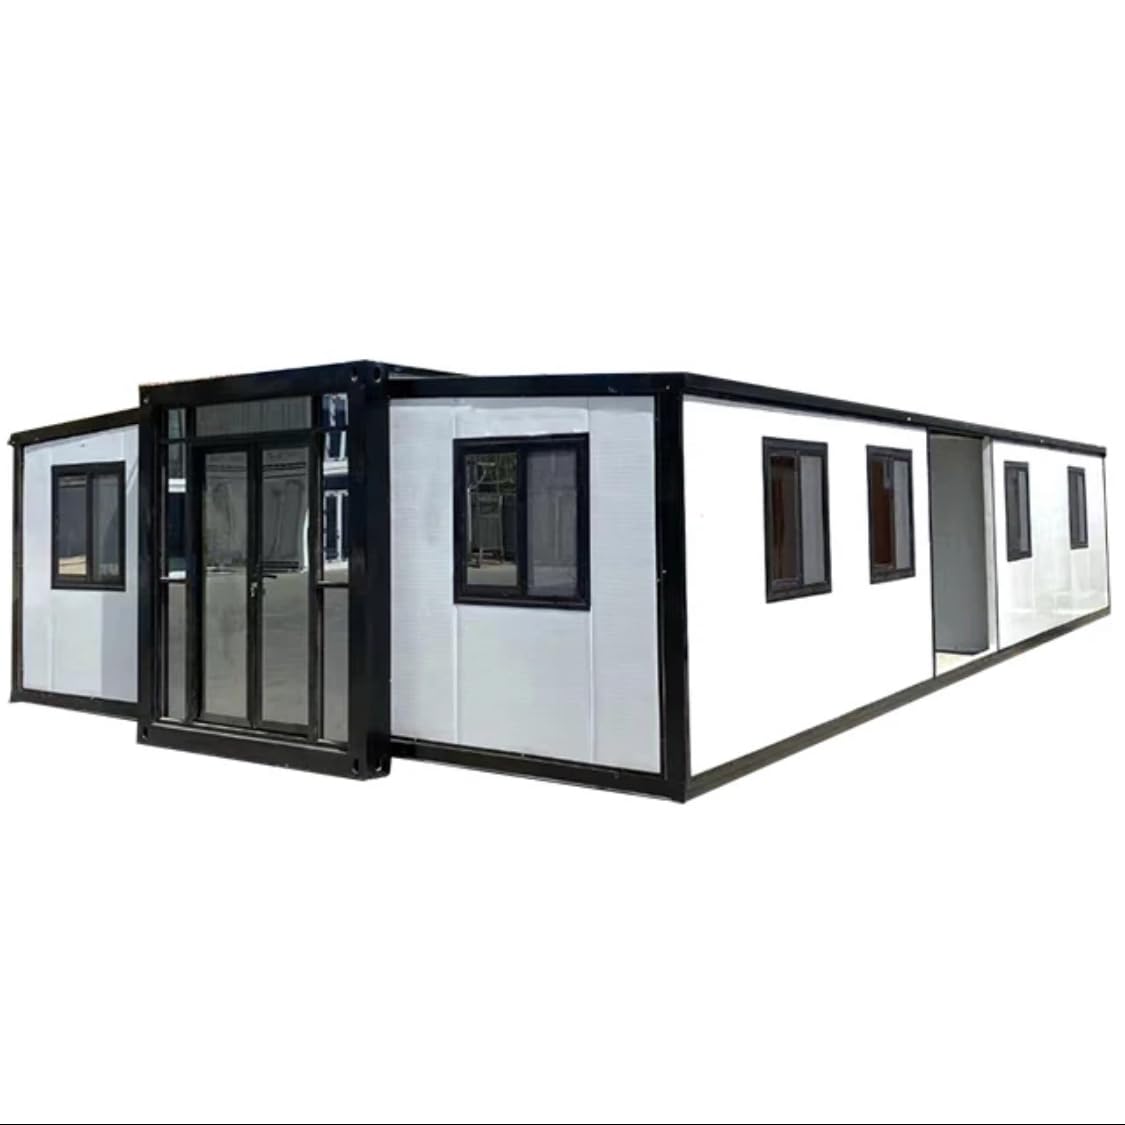 Portable Prefabricated Tiny Home 30x20ft, Mobile Expandable Plastic Prefab House for Hotel, Booth, Office, Guard House, Shop, Villa, Warehouse,Workshop (with Restroom)